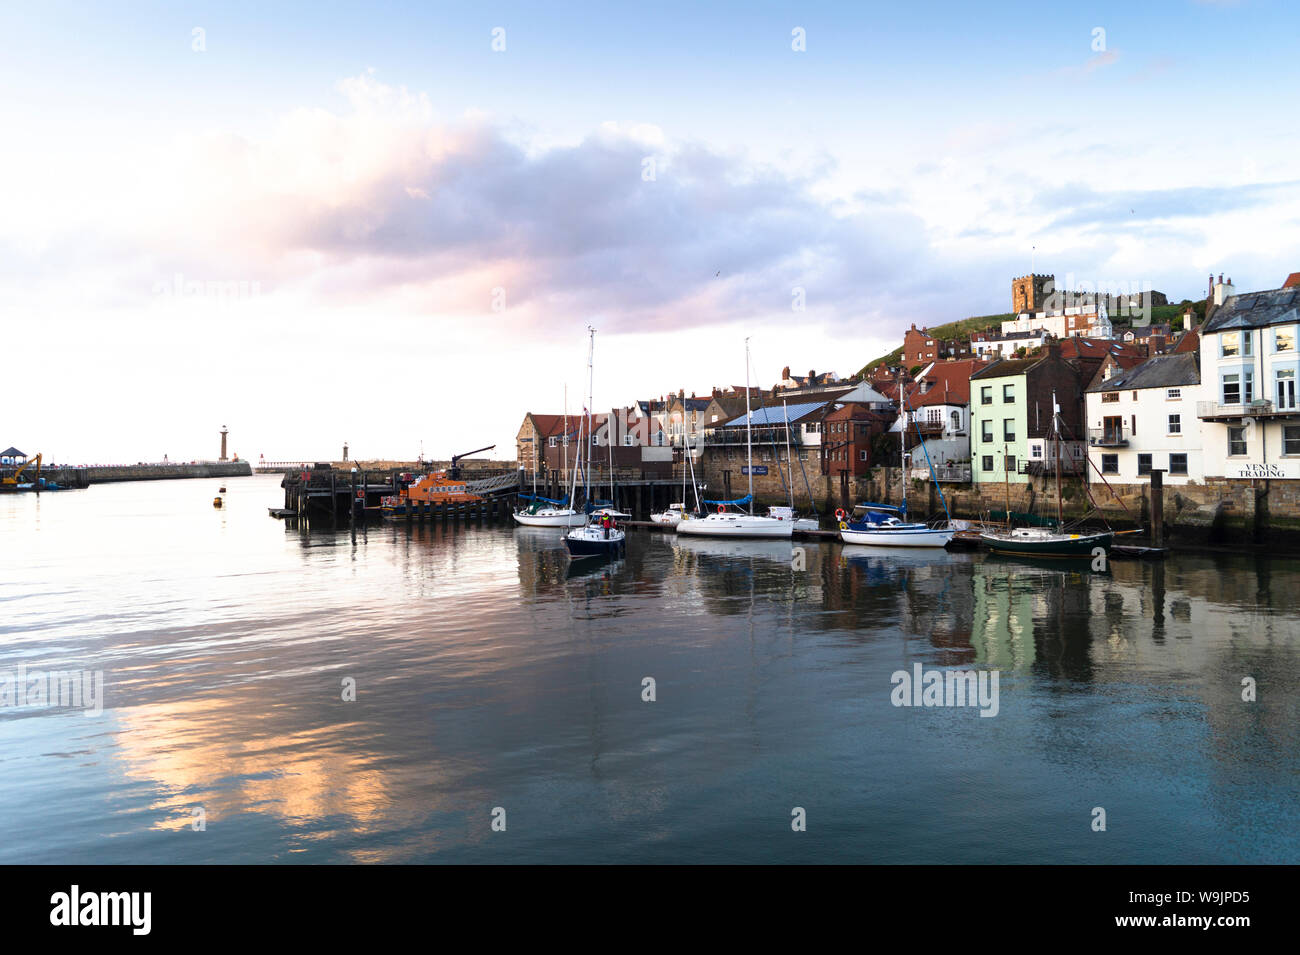 A tranquil evening in Whitby Harbour showing the old town. Stock Photo